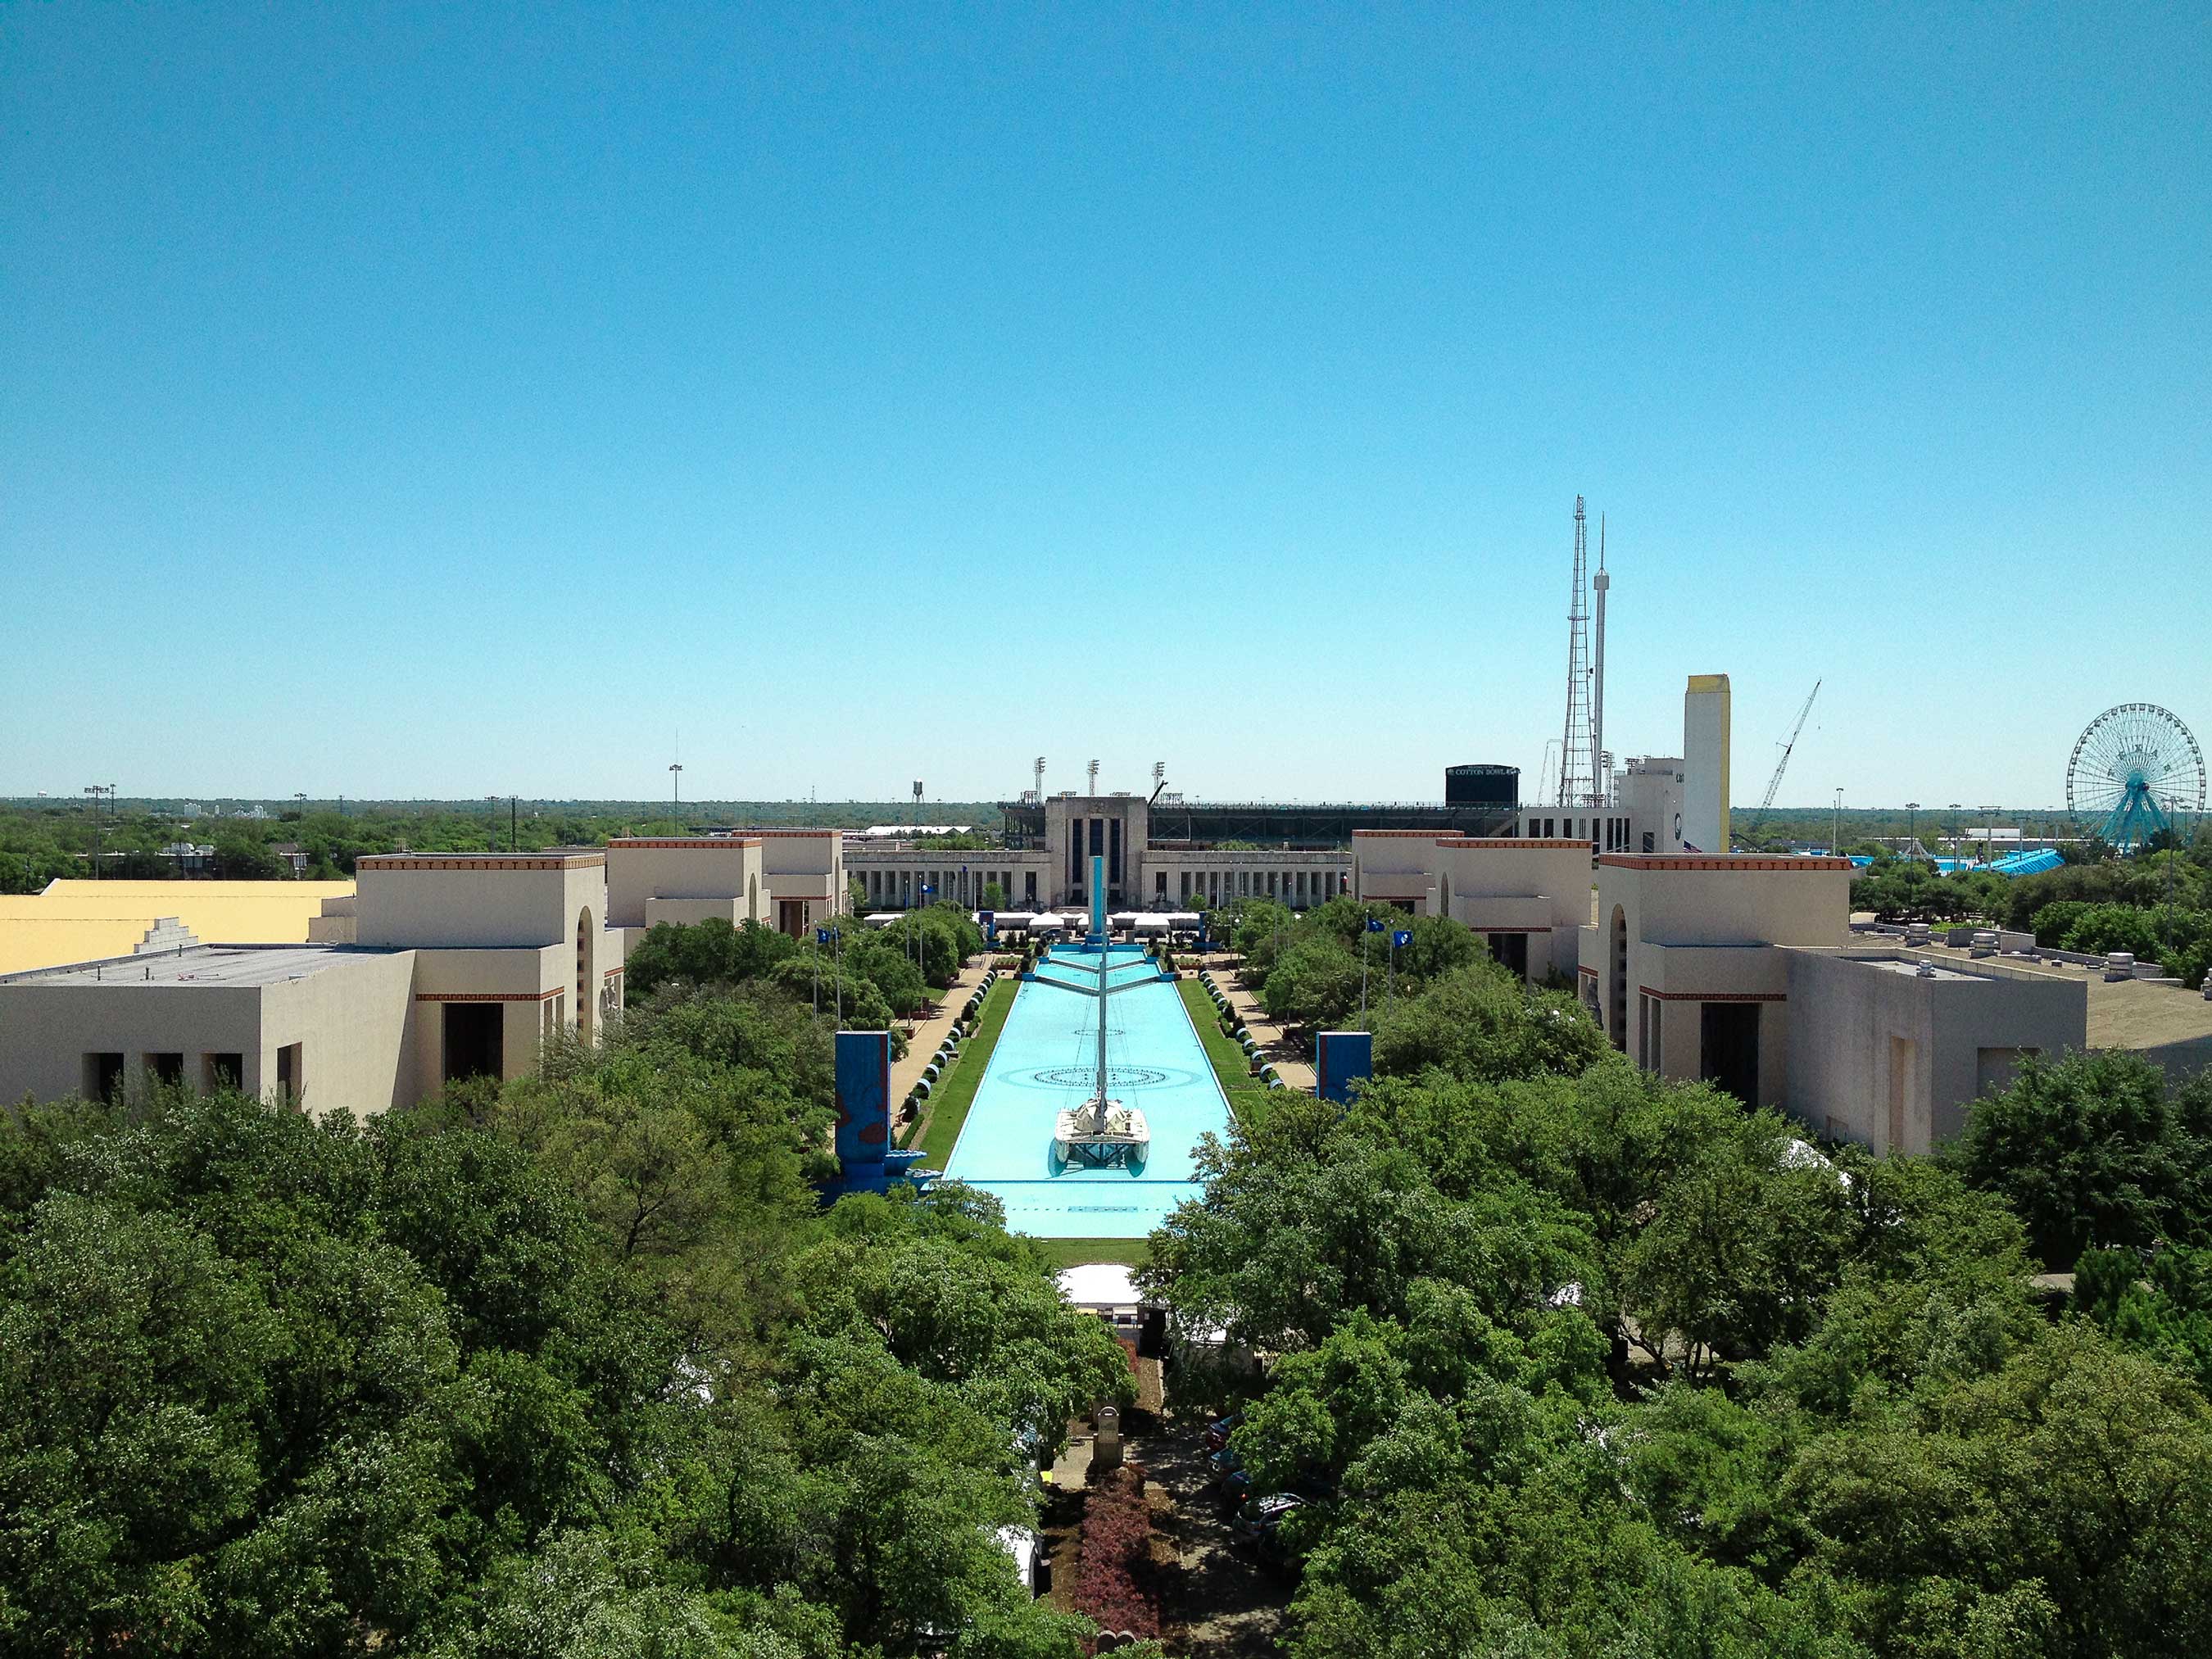 Earth Day Texas takes place at the historic Fair Park in Dallas on April 24 – 26.